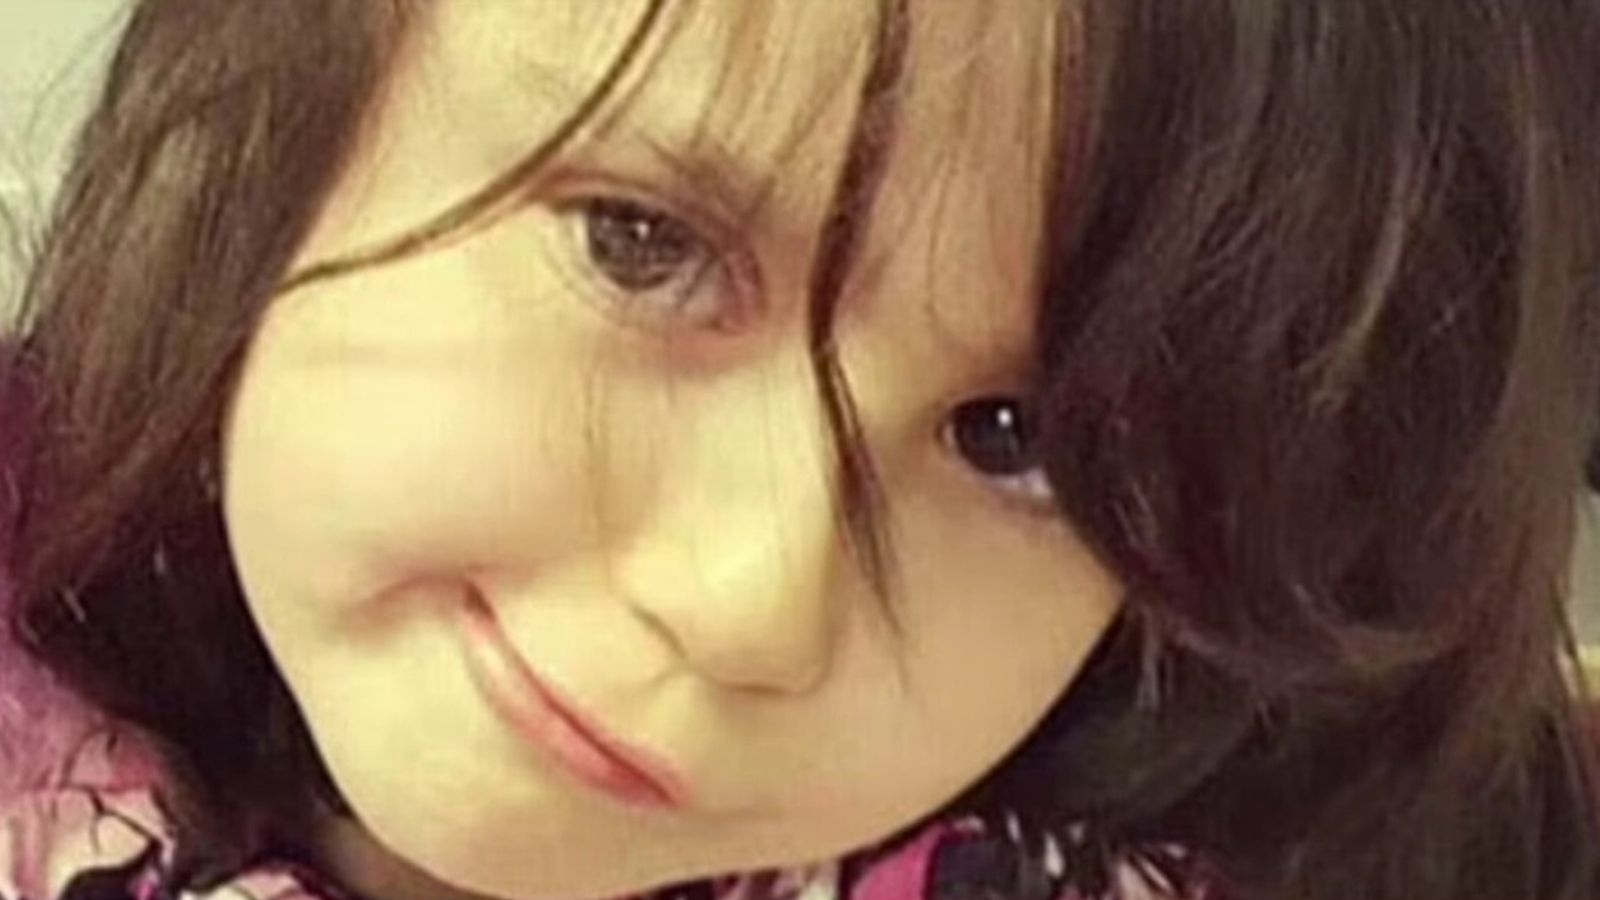 Sara Sharif's father, stepmother and uncle arrested on suspicion of murder